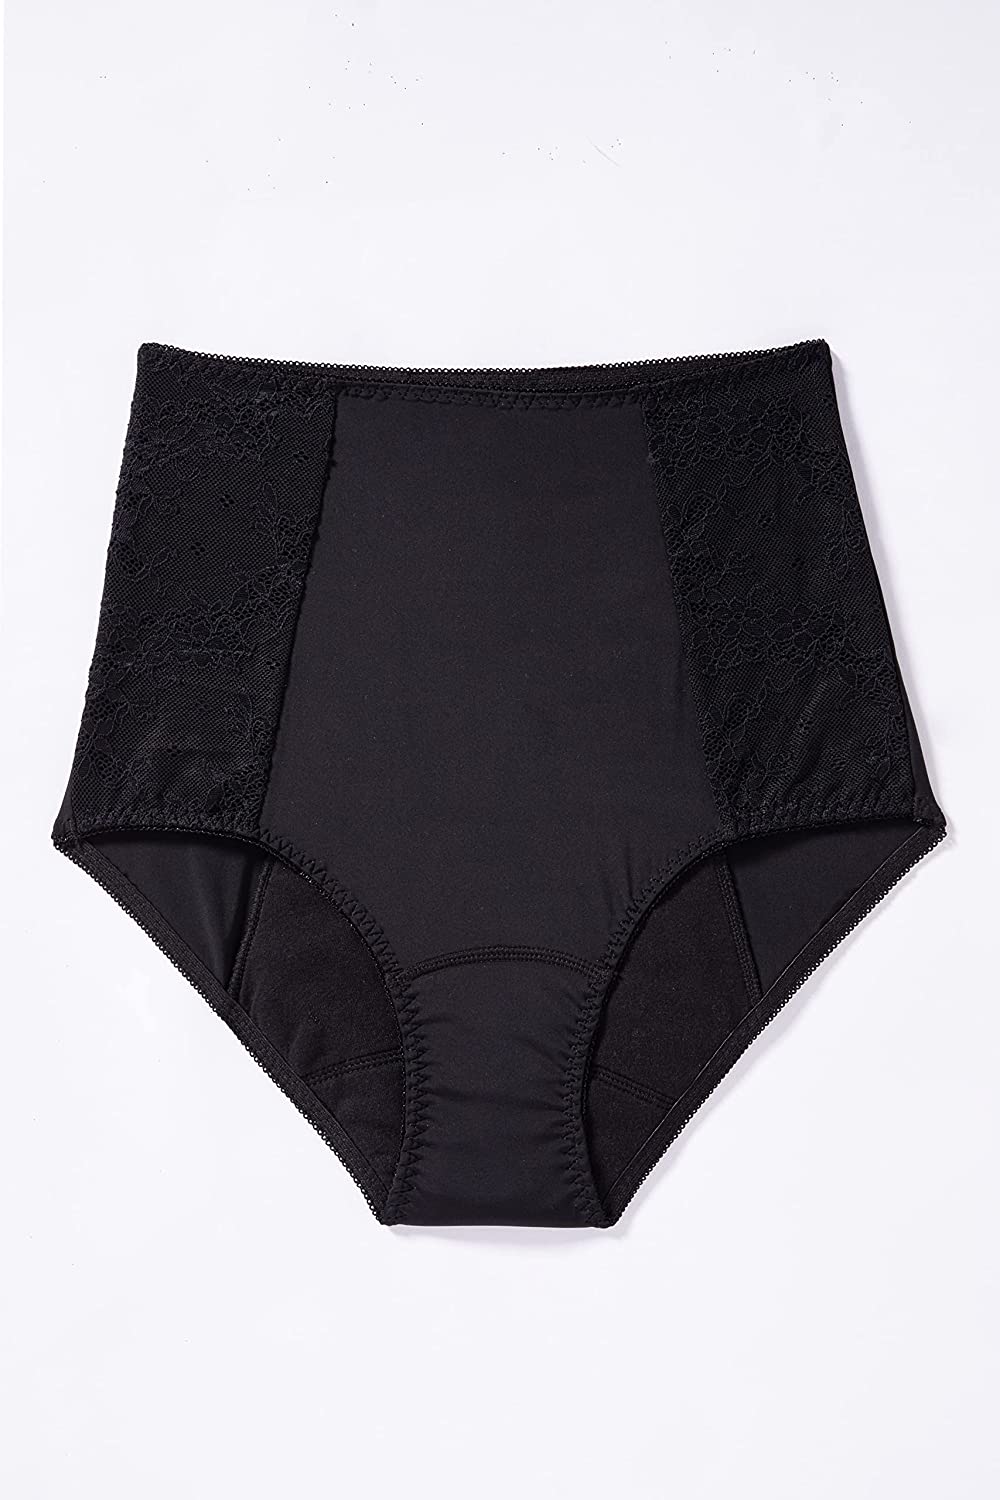 High Waisted Full Coverage Period Underwear